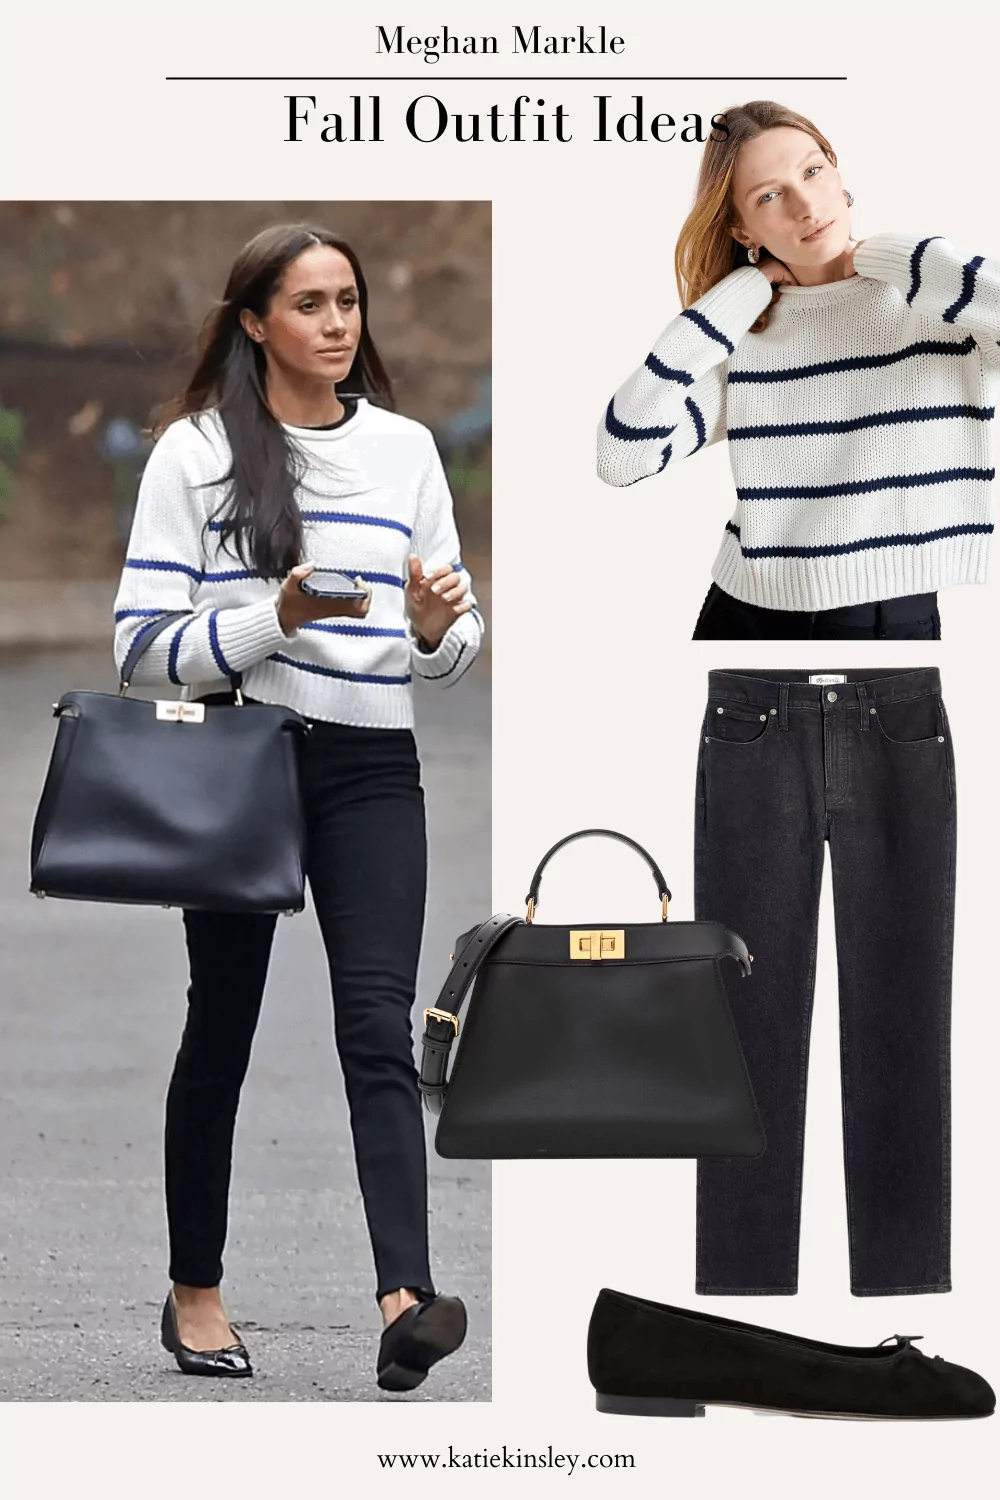 Fall Outfit ideas Meghan Markle Outfit 3